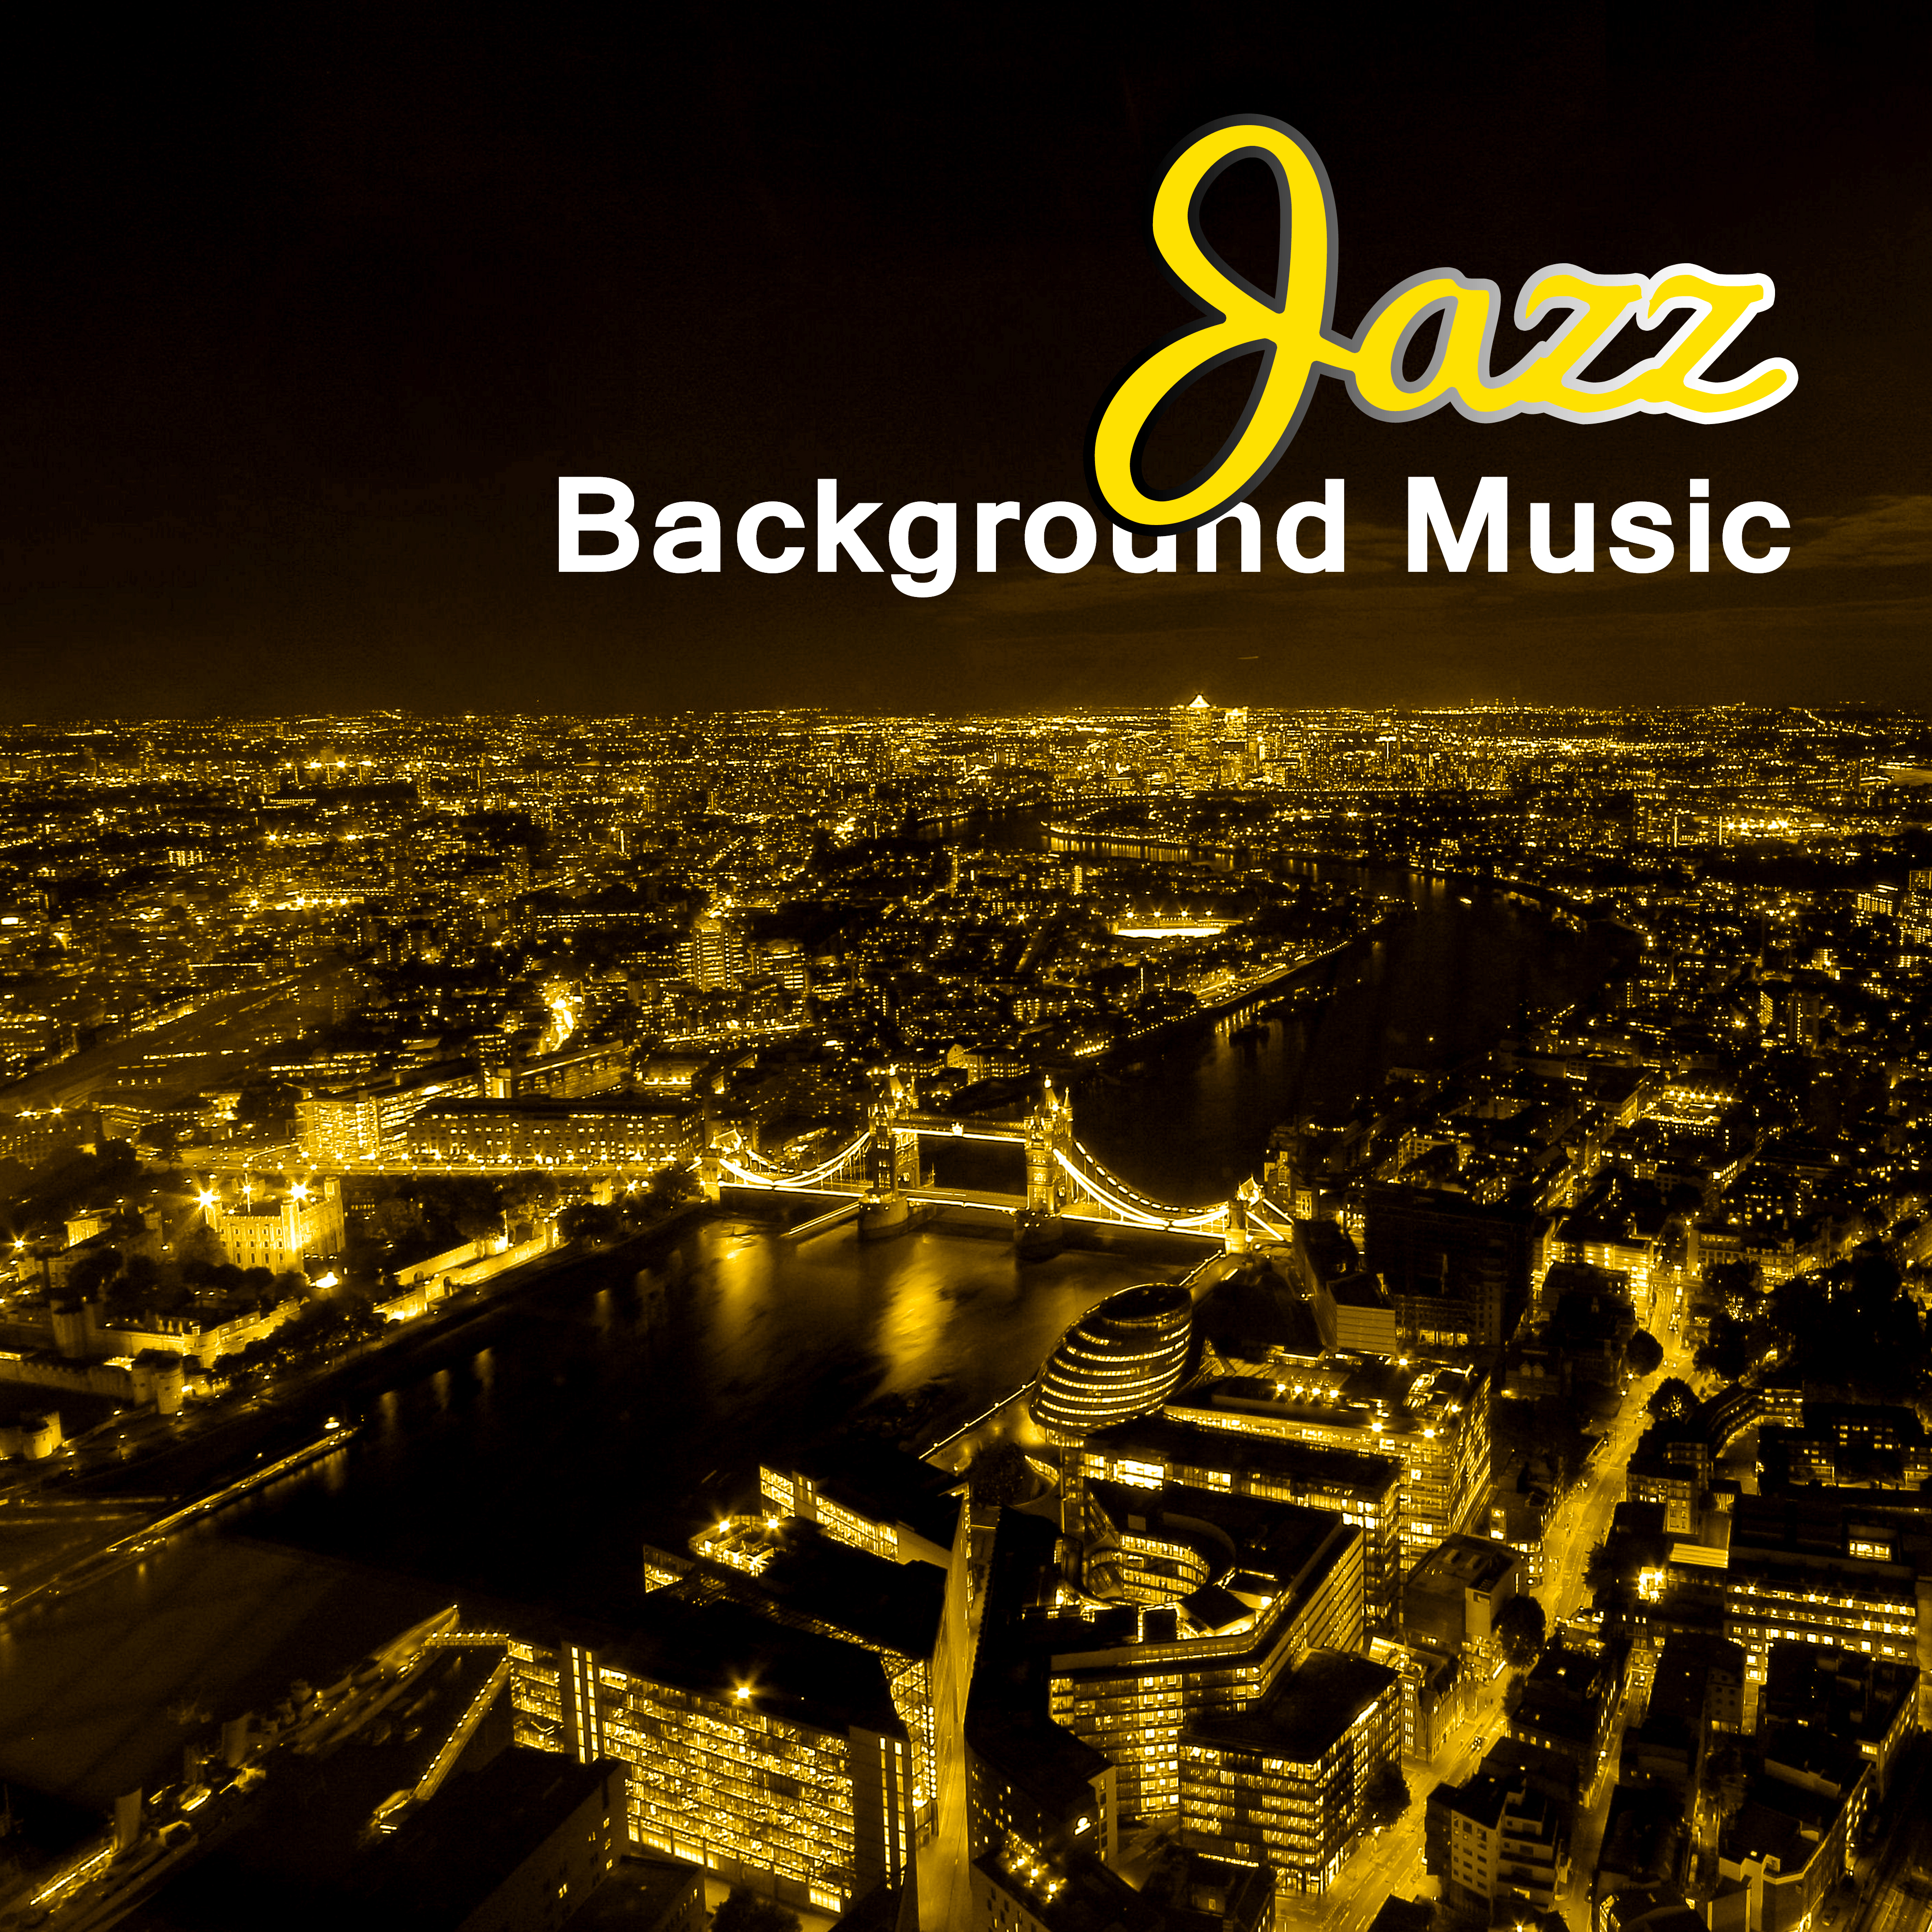 Jazz Background Music  Easy Listening Smooth Jazz, Drinking Coffee in Coffeehouse, Piano Music for Italian Dinner, Bar Music Cafe, Cocktail Party, Ambient Music